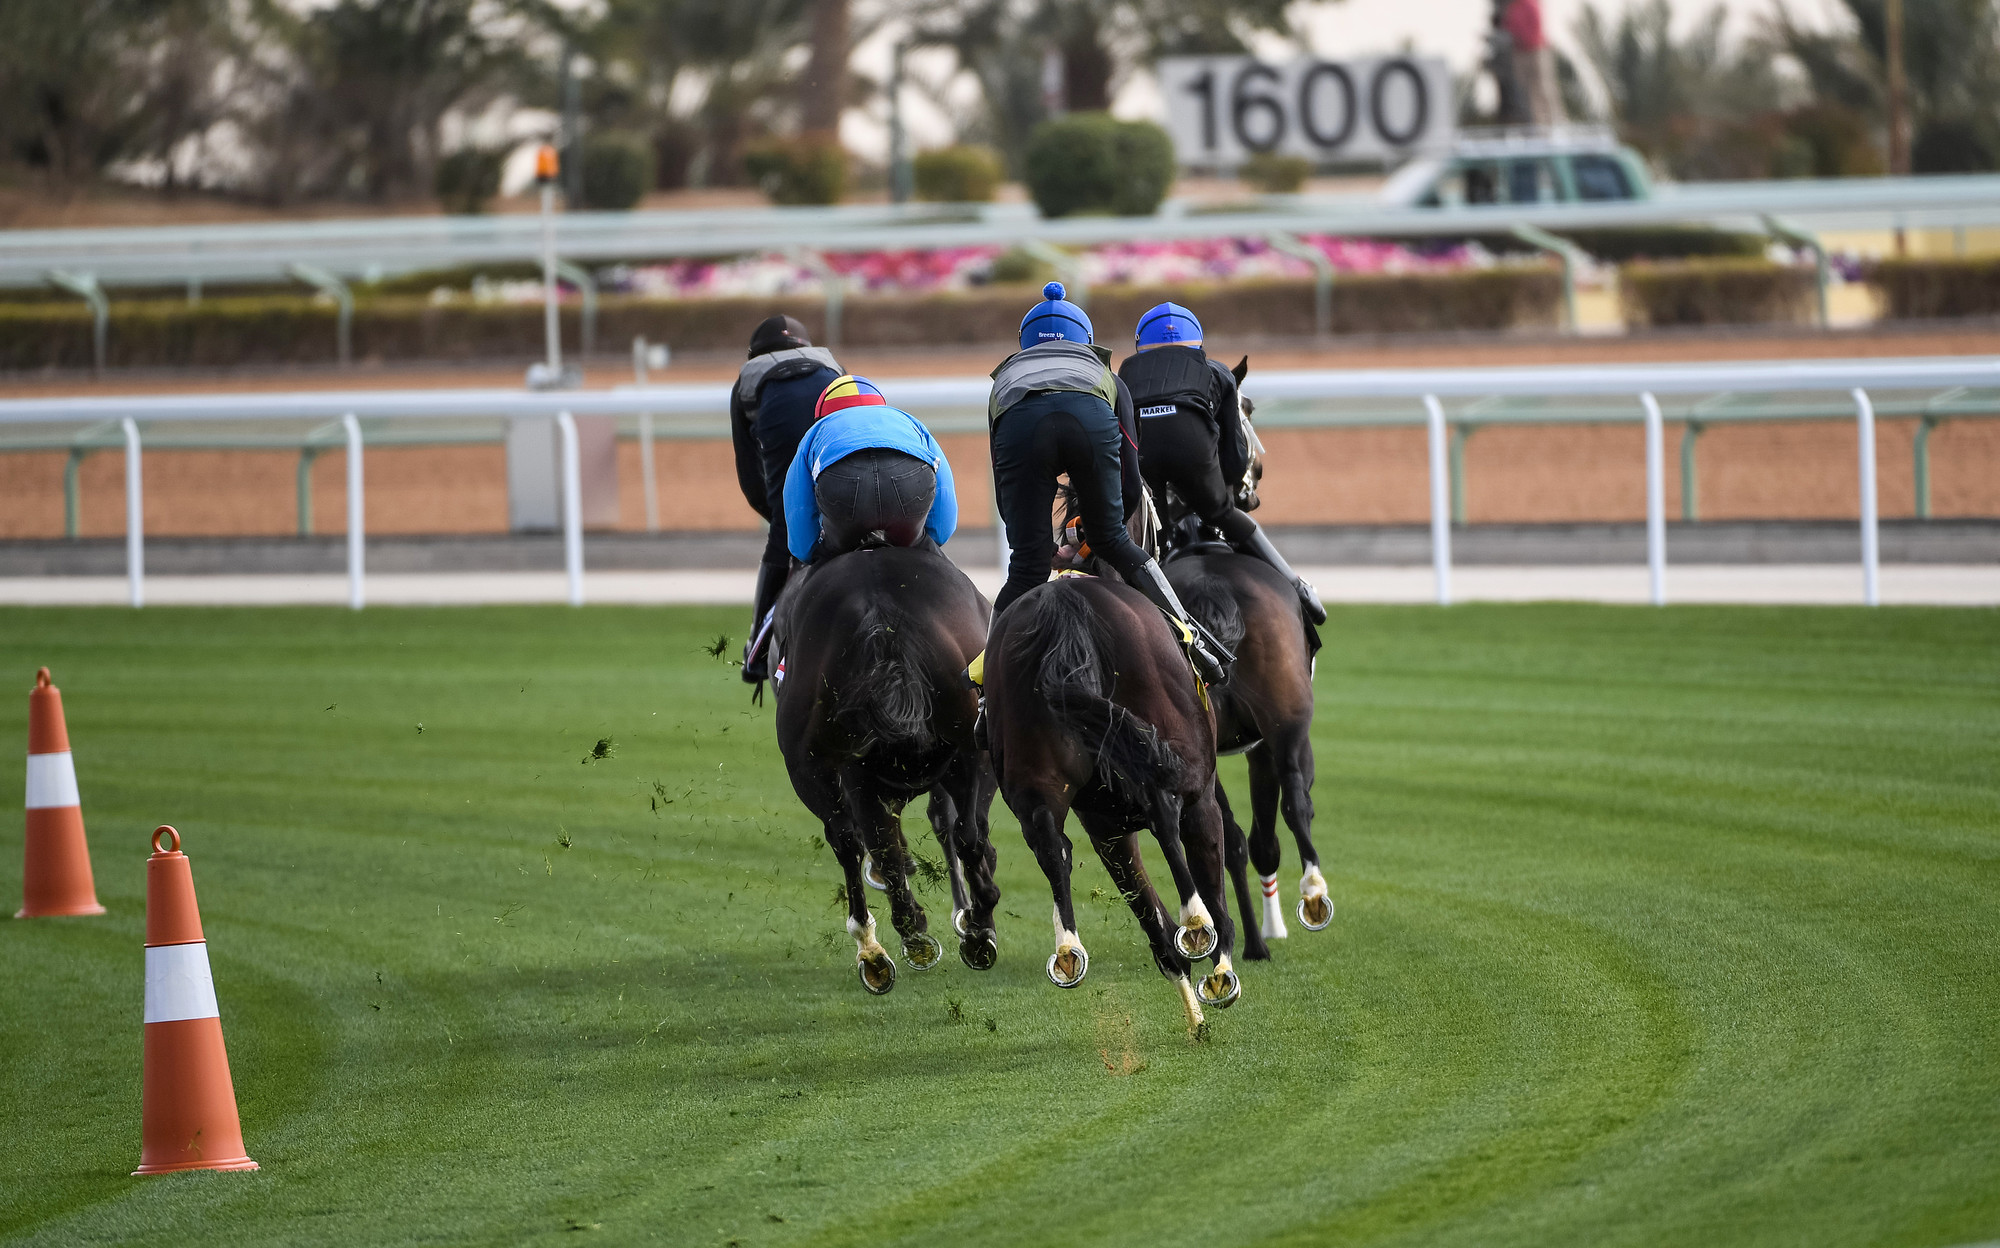 Handling well: “All four of us were in agreement that it was a fair track with genuine good-to-firm ground,” William Buick said after the trial. Photo: Jockey Club of Saudi Arabia